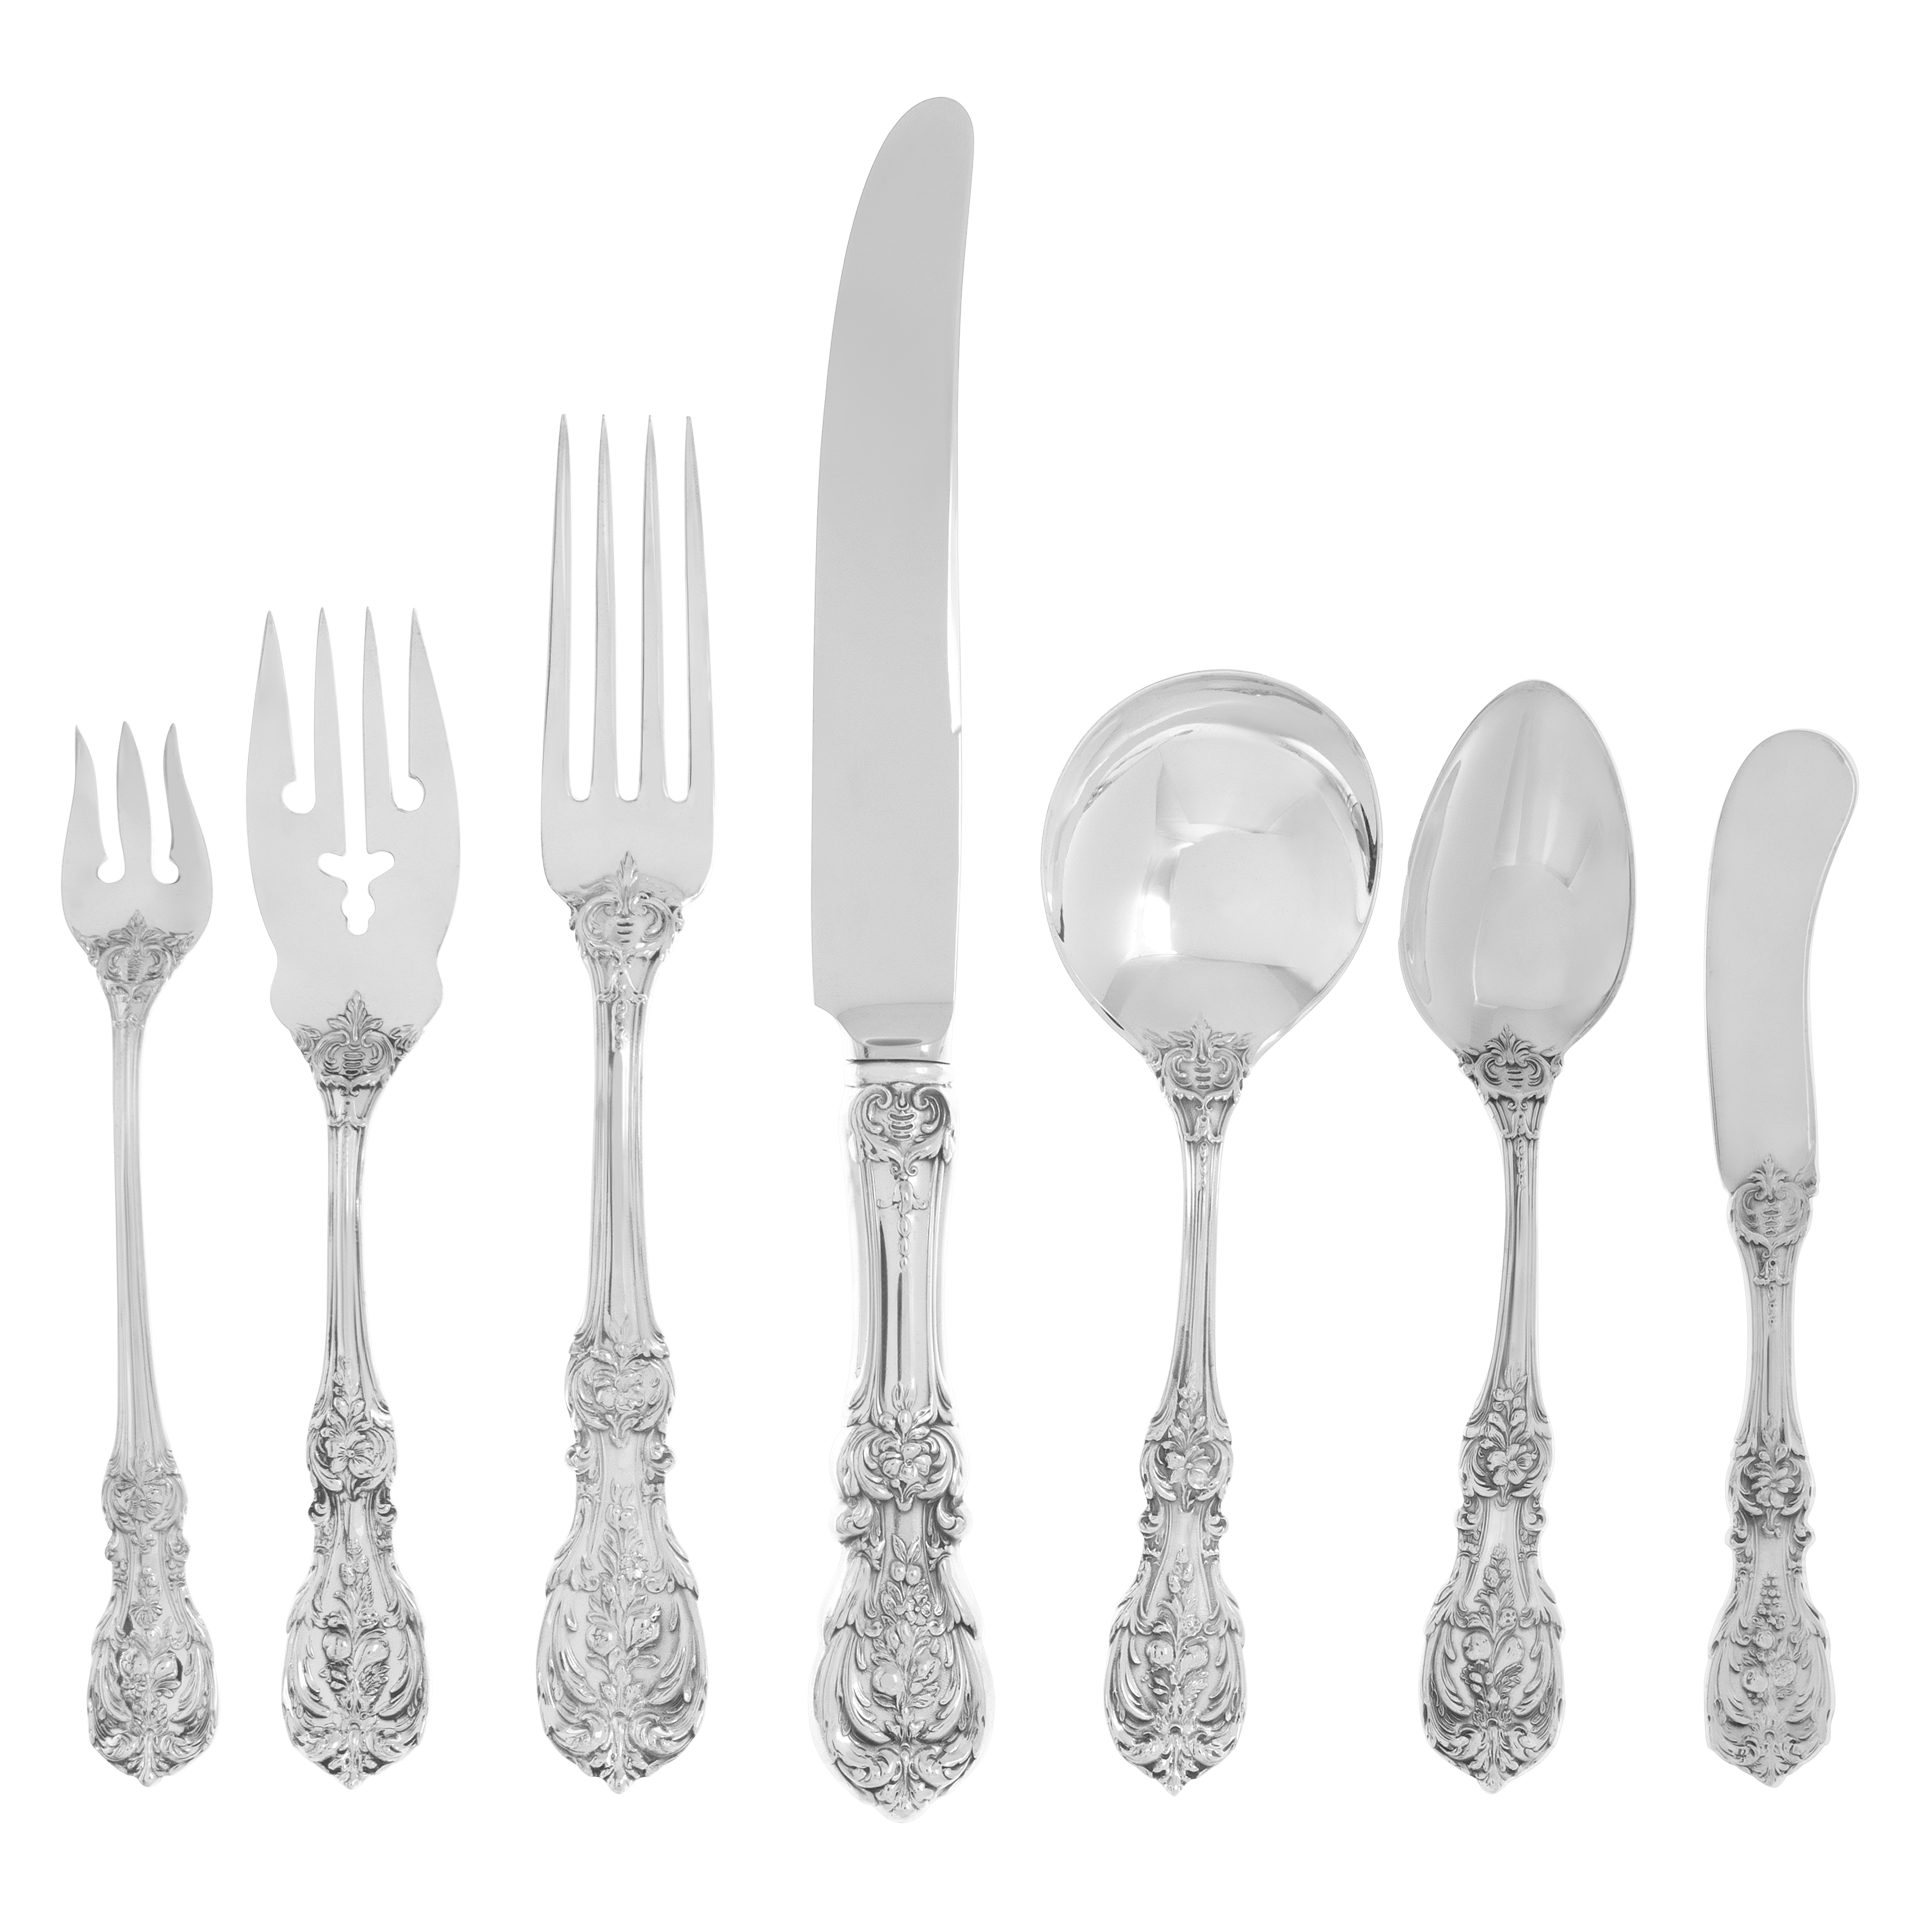 FRANCIS THE FIRST sterling silver flatware set patented in 1907 by Reed & Barton. 57 pieces- 4 place set for 7 (and xtras)+ 6 serving pieces. image 1